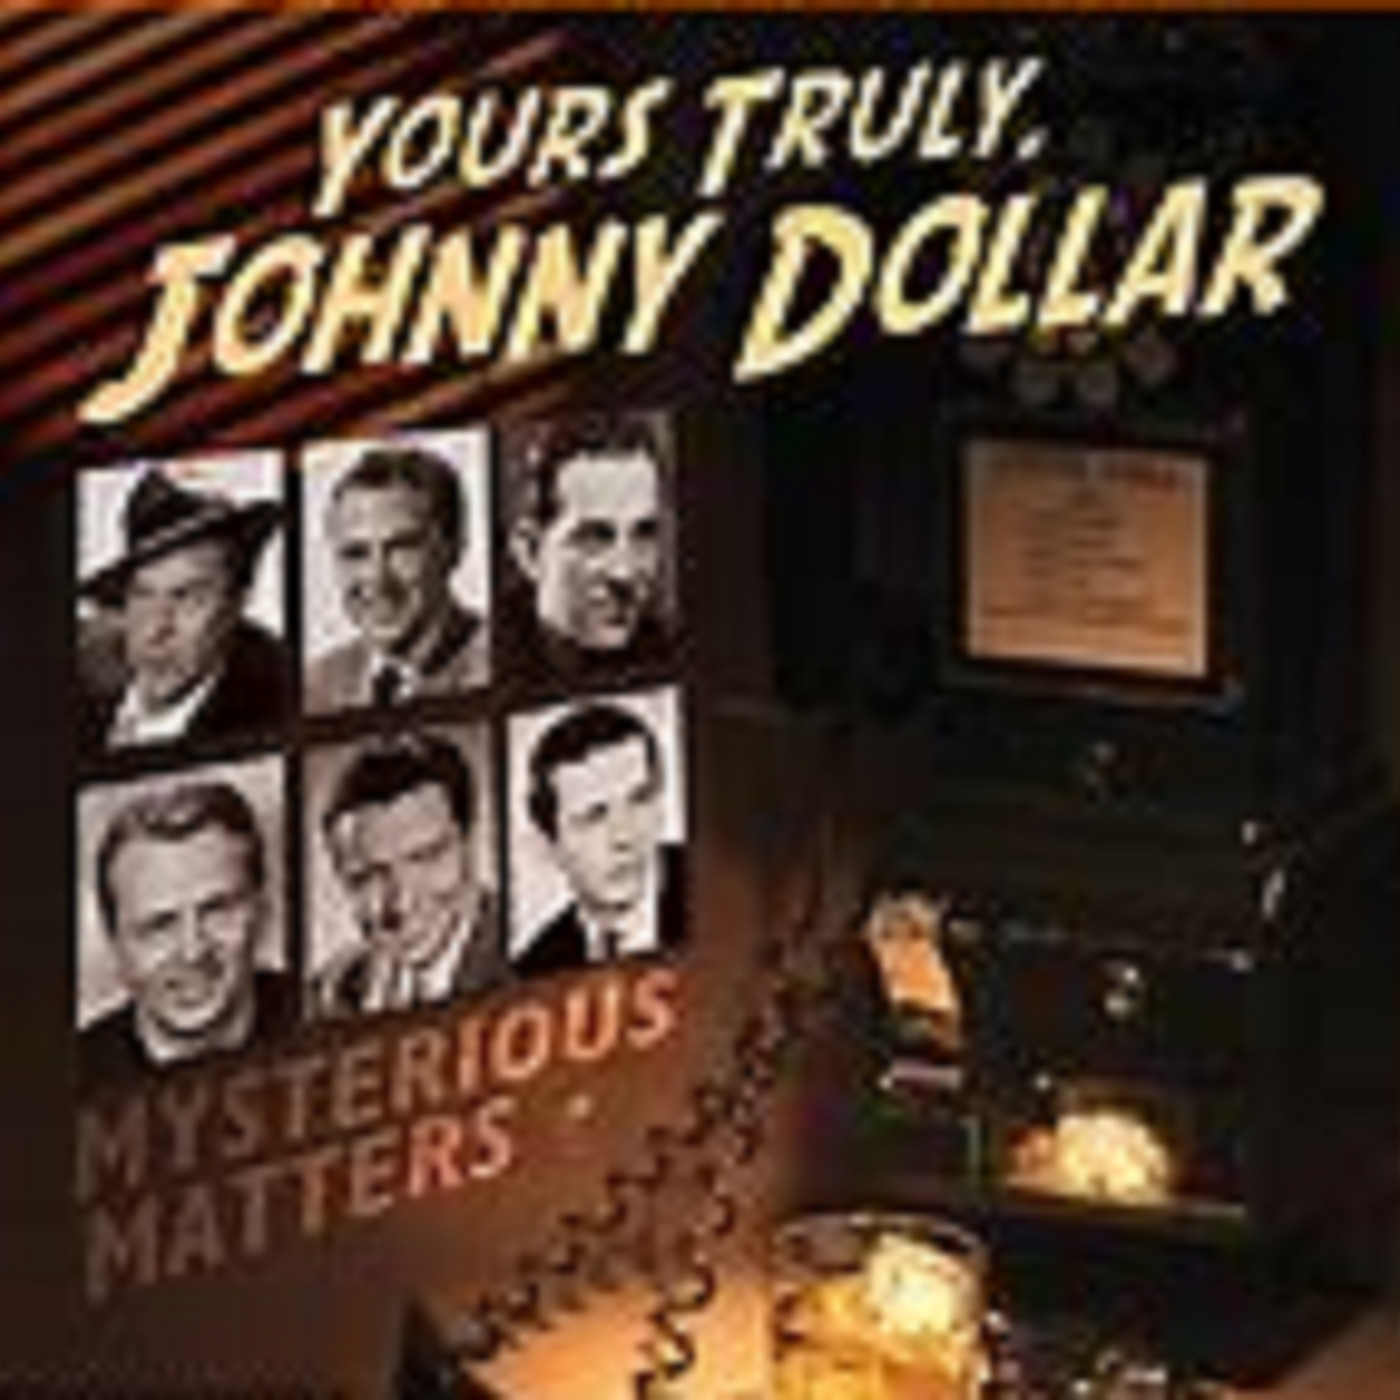 Yours Truly, Johnny Dollar - 012862, episode 776 - The Can't Be So Matter